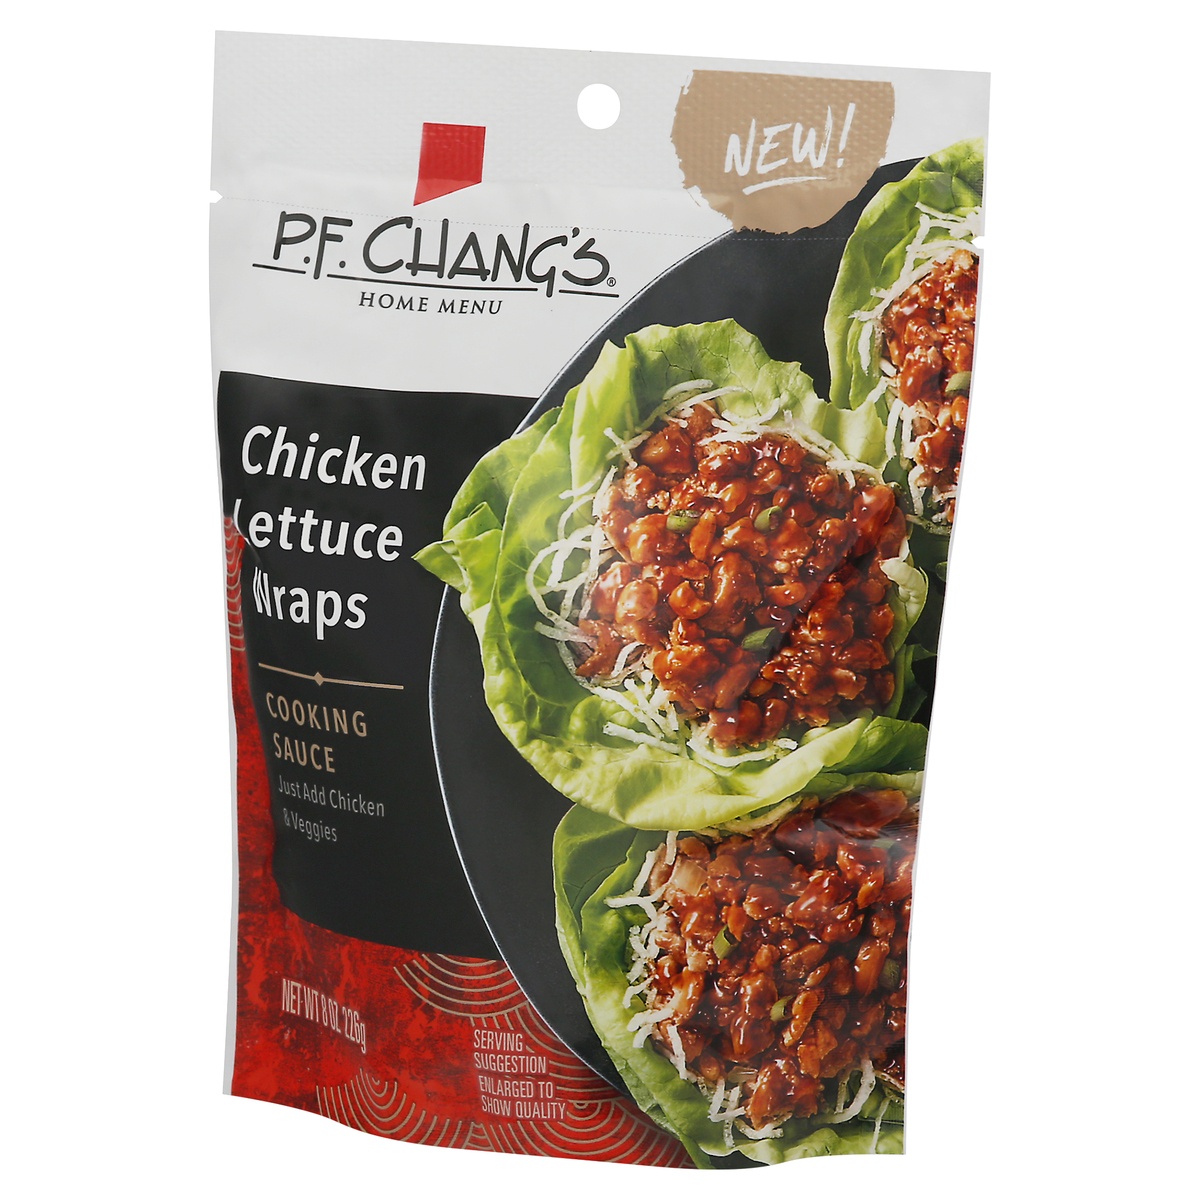 slide 4 of 9, P.F. Chang's Home Menu Chicken Lettuce Wraps Cooking Sauce Pouch, 8 oz., 8 oz